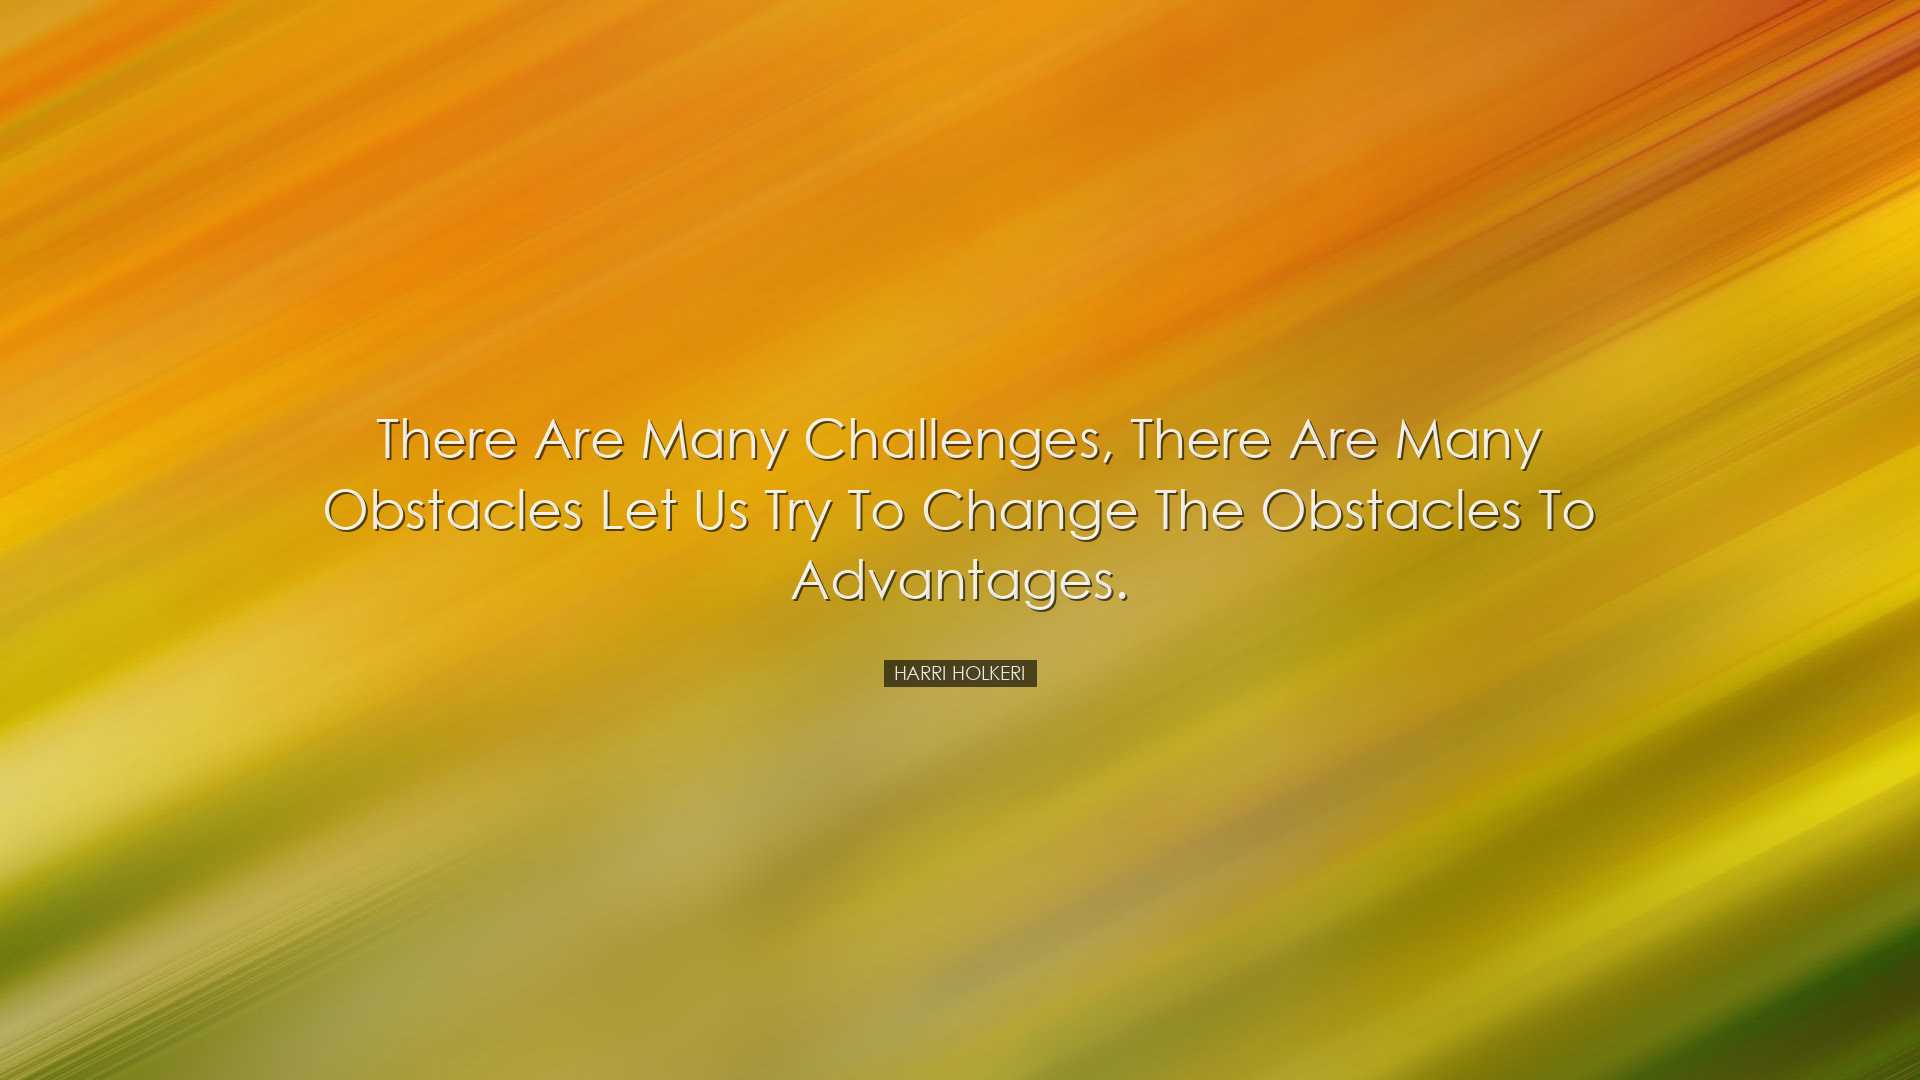 There are many challenges, there are many obstacles let us try to